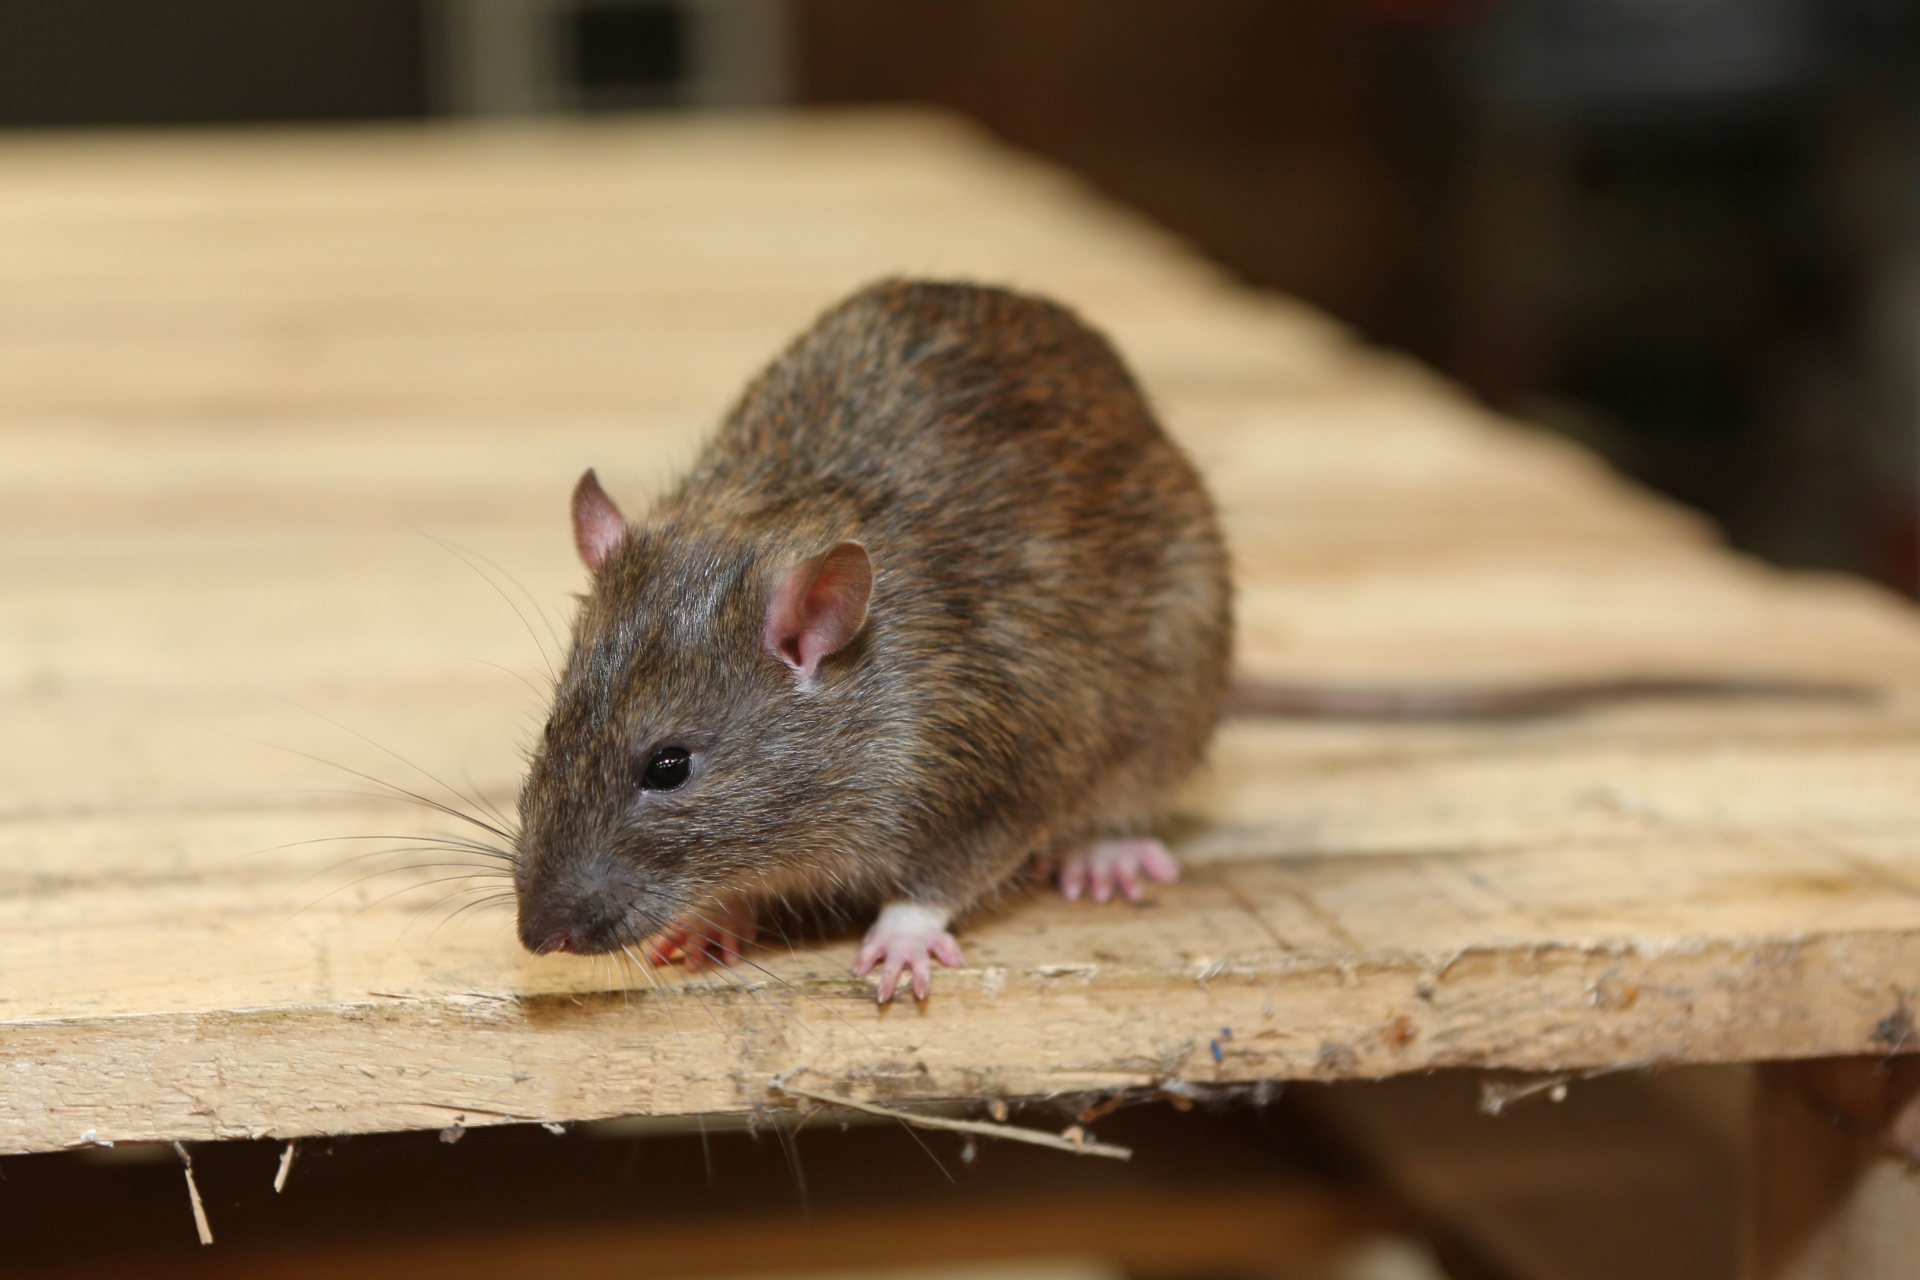 Rat Infestation, Pest Control in Fulham, SW6. Call Now 020 8166 9746